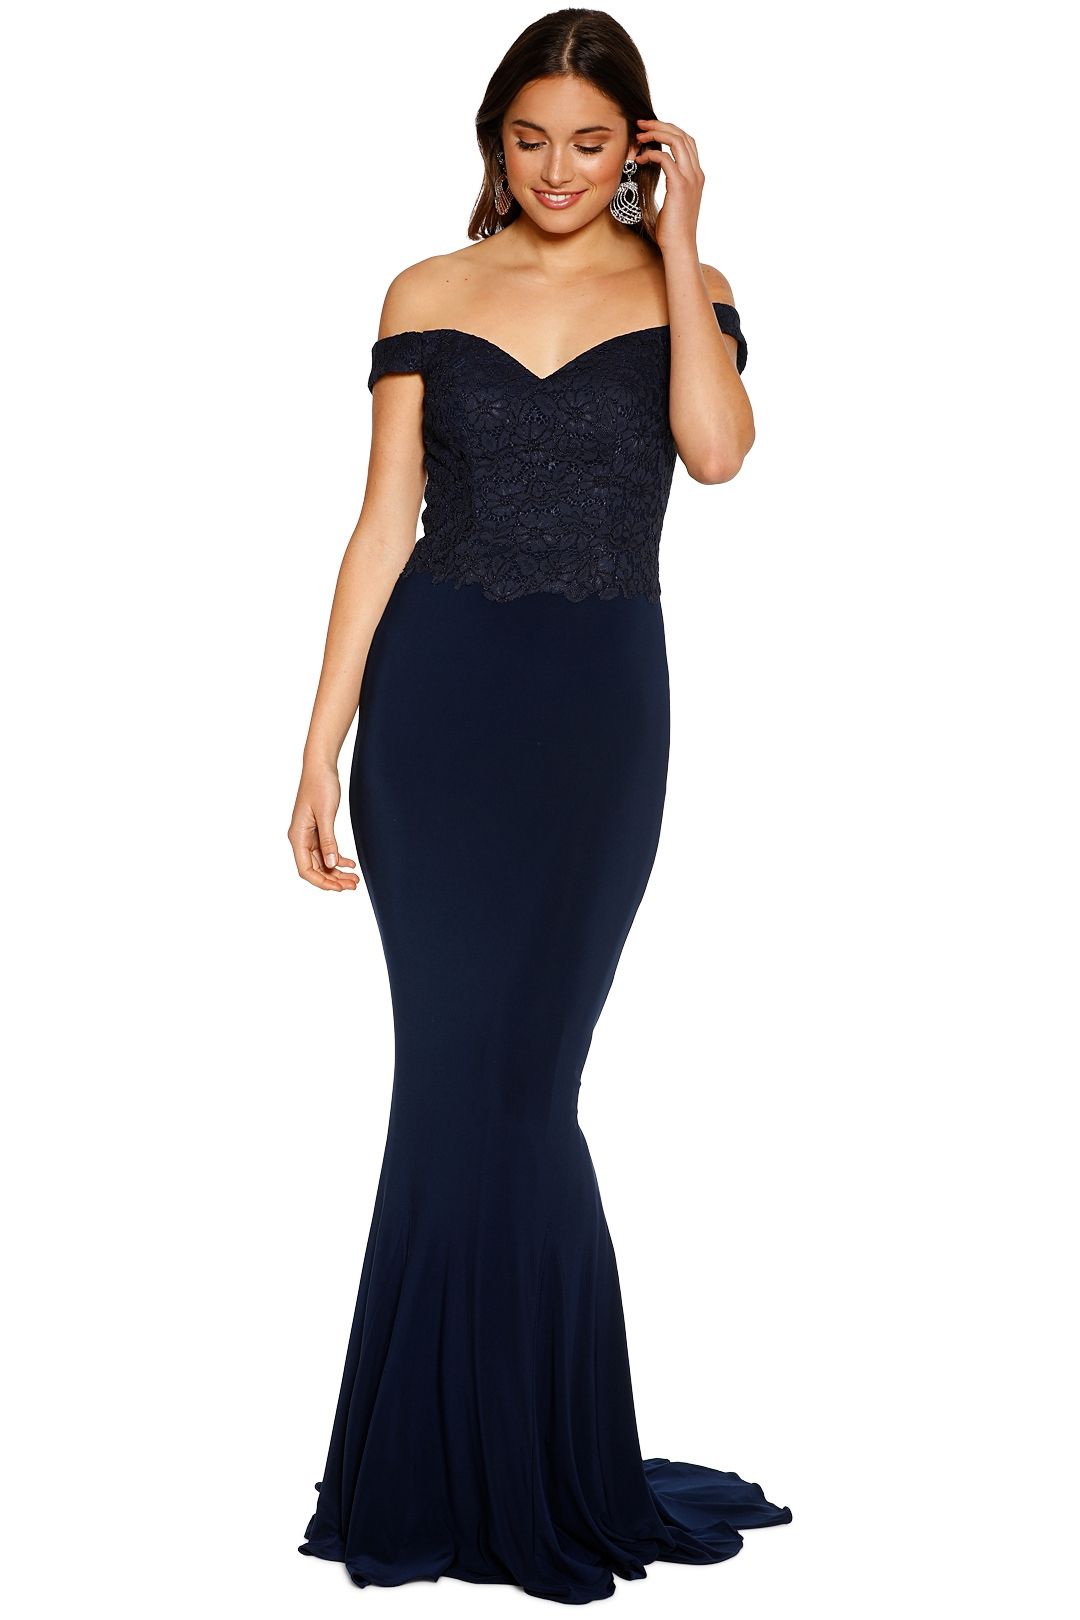 Tania Olsen - Jacqulyn Gown - Navy - Front